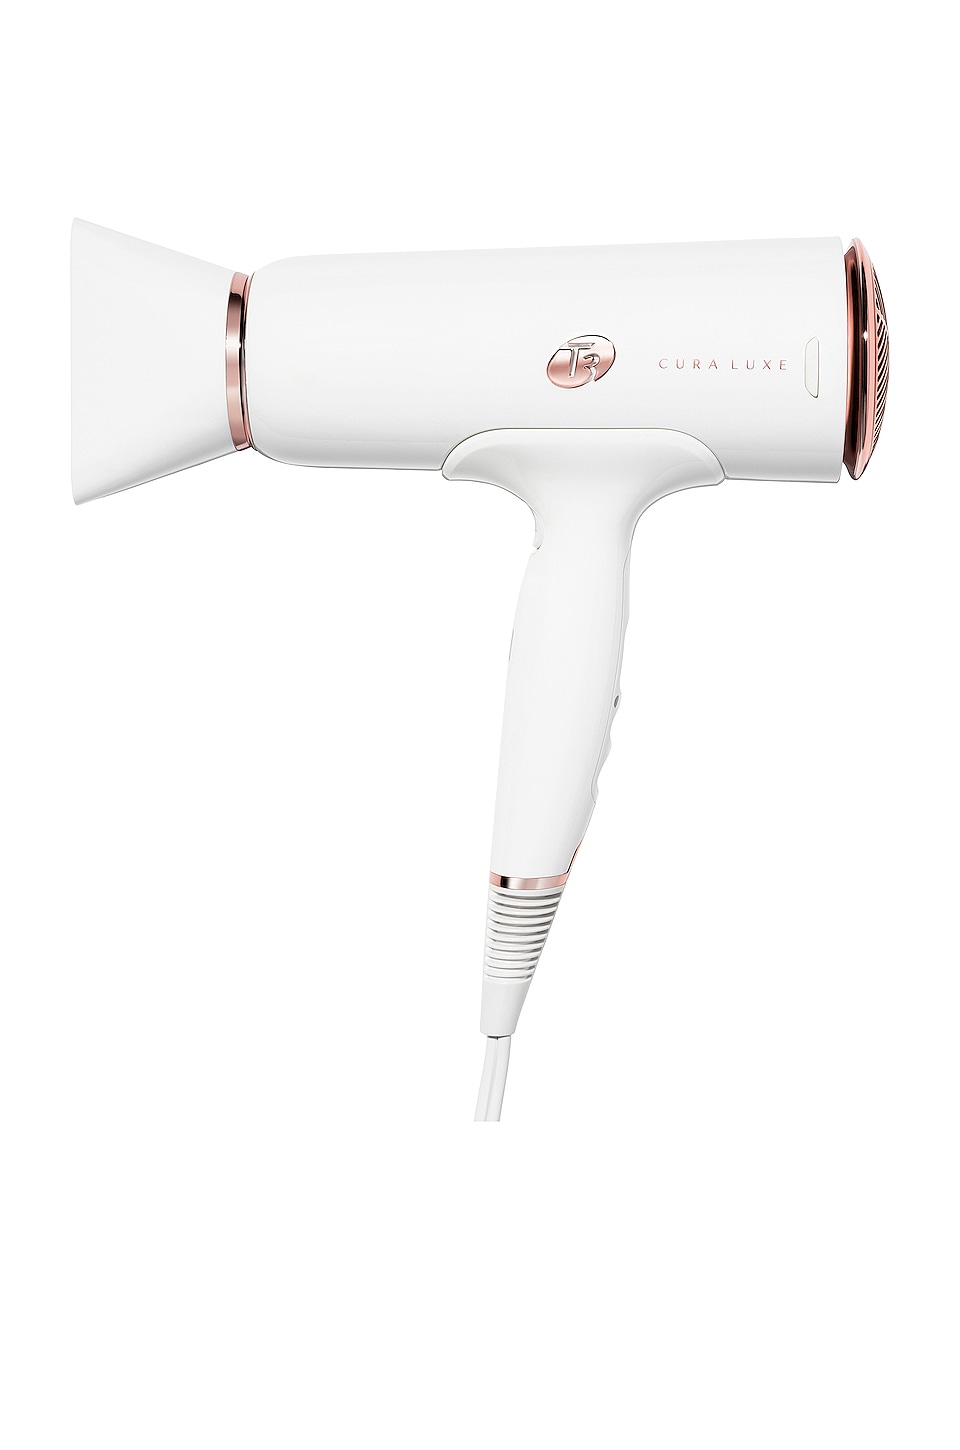 T3 CURA LUXE PROFESSIONAL IONIC HAIR DRYER,TTHR-WU22